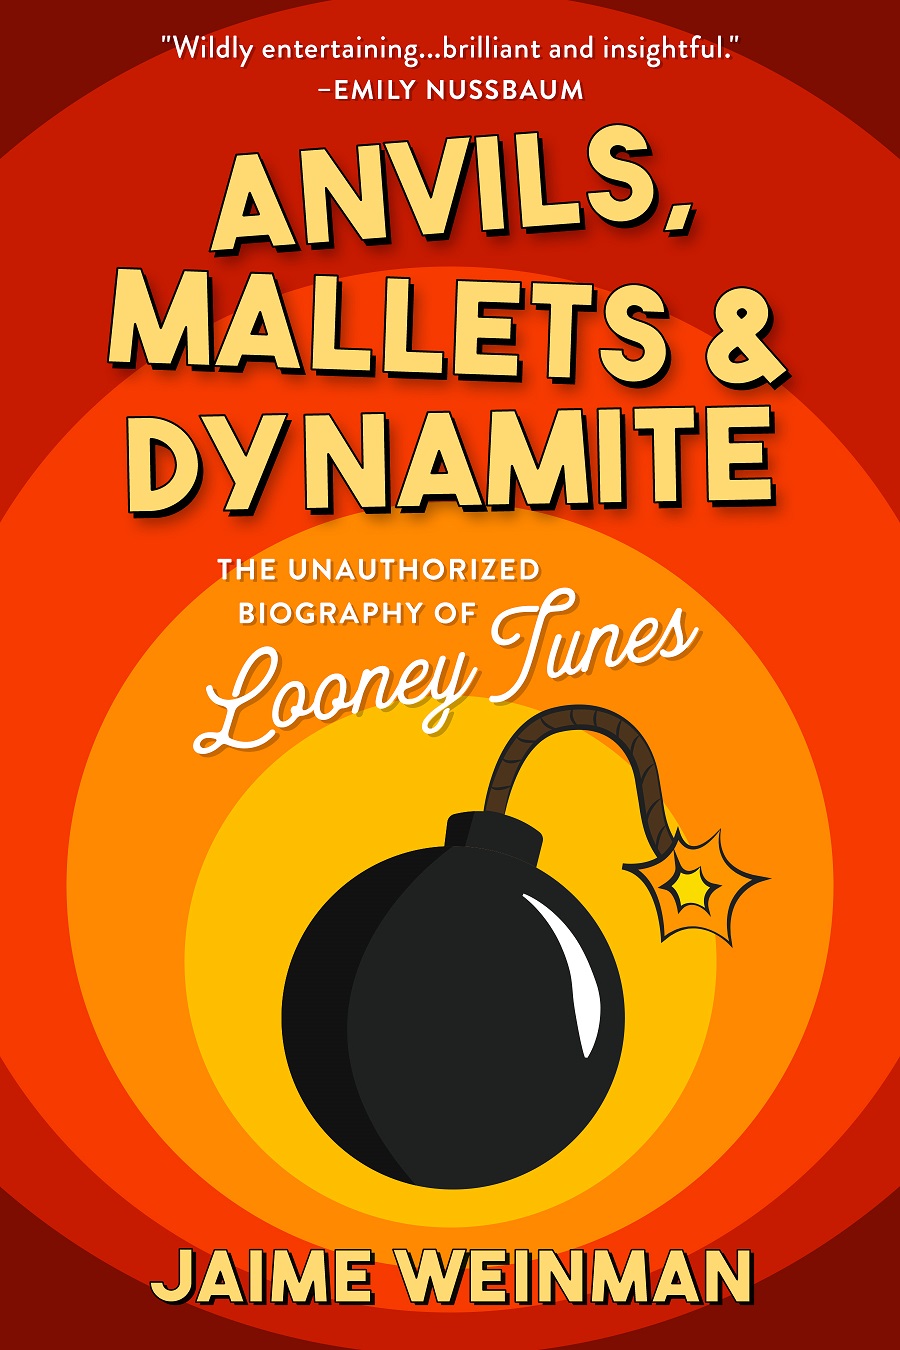 Anvils, Mallets & Dynamite: The Unauthorized Biography of Looney Tunes